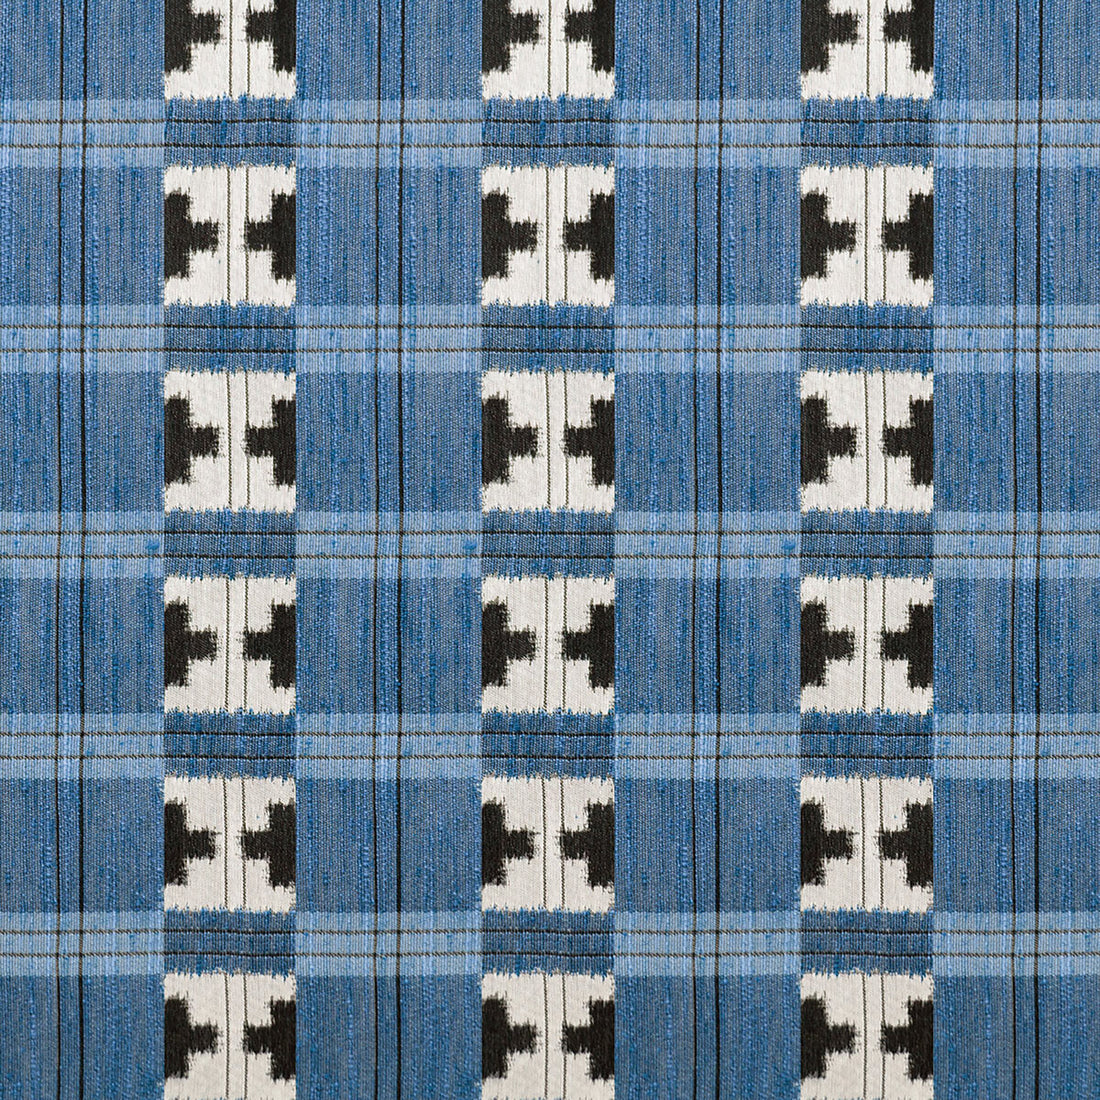 Takara fabric in azul color - pattern GDT5633.002.0 - by Gaston y Daniela in the Gaston Japon collection